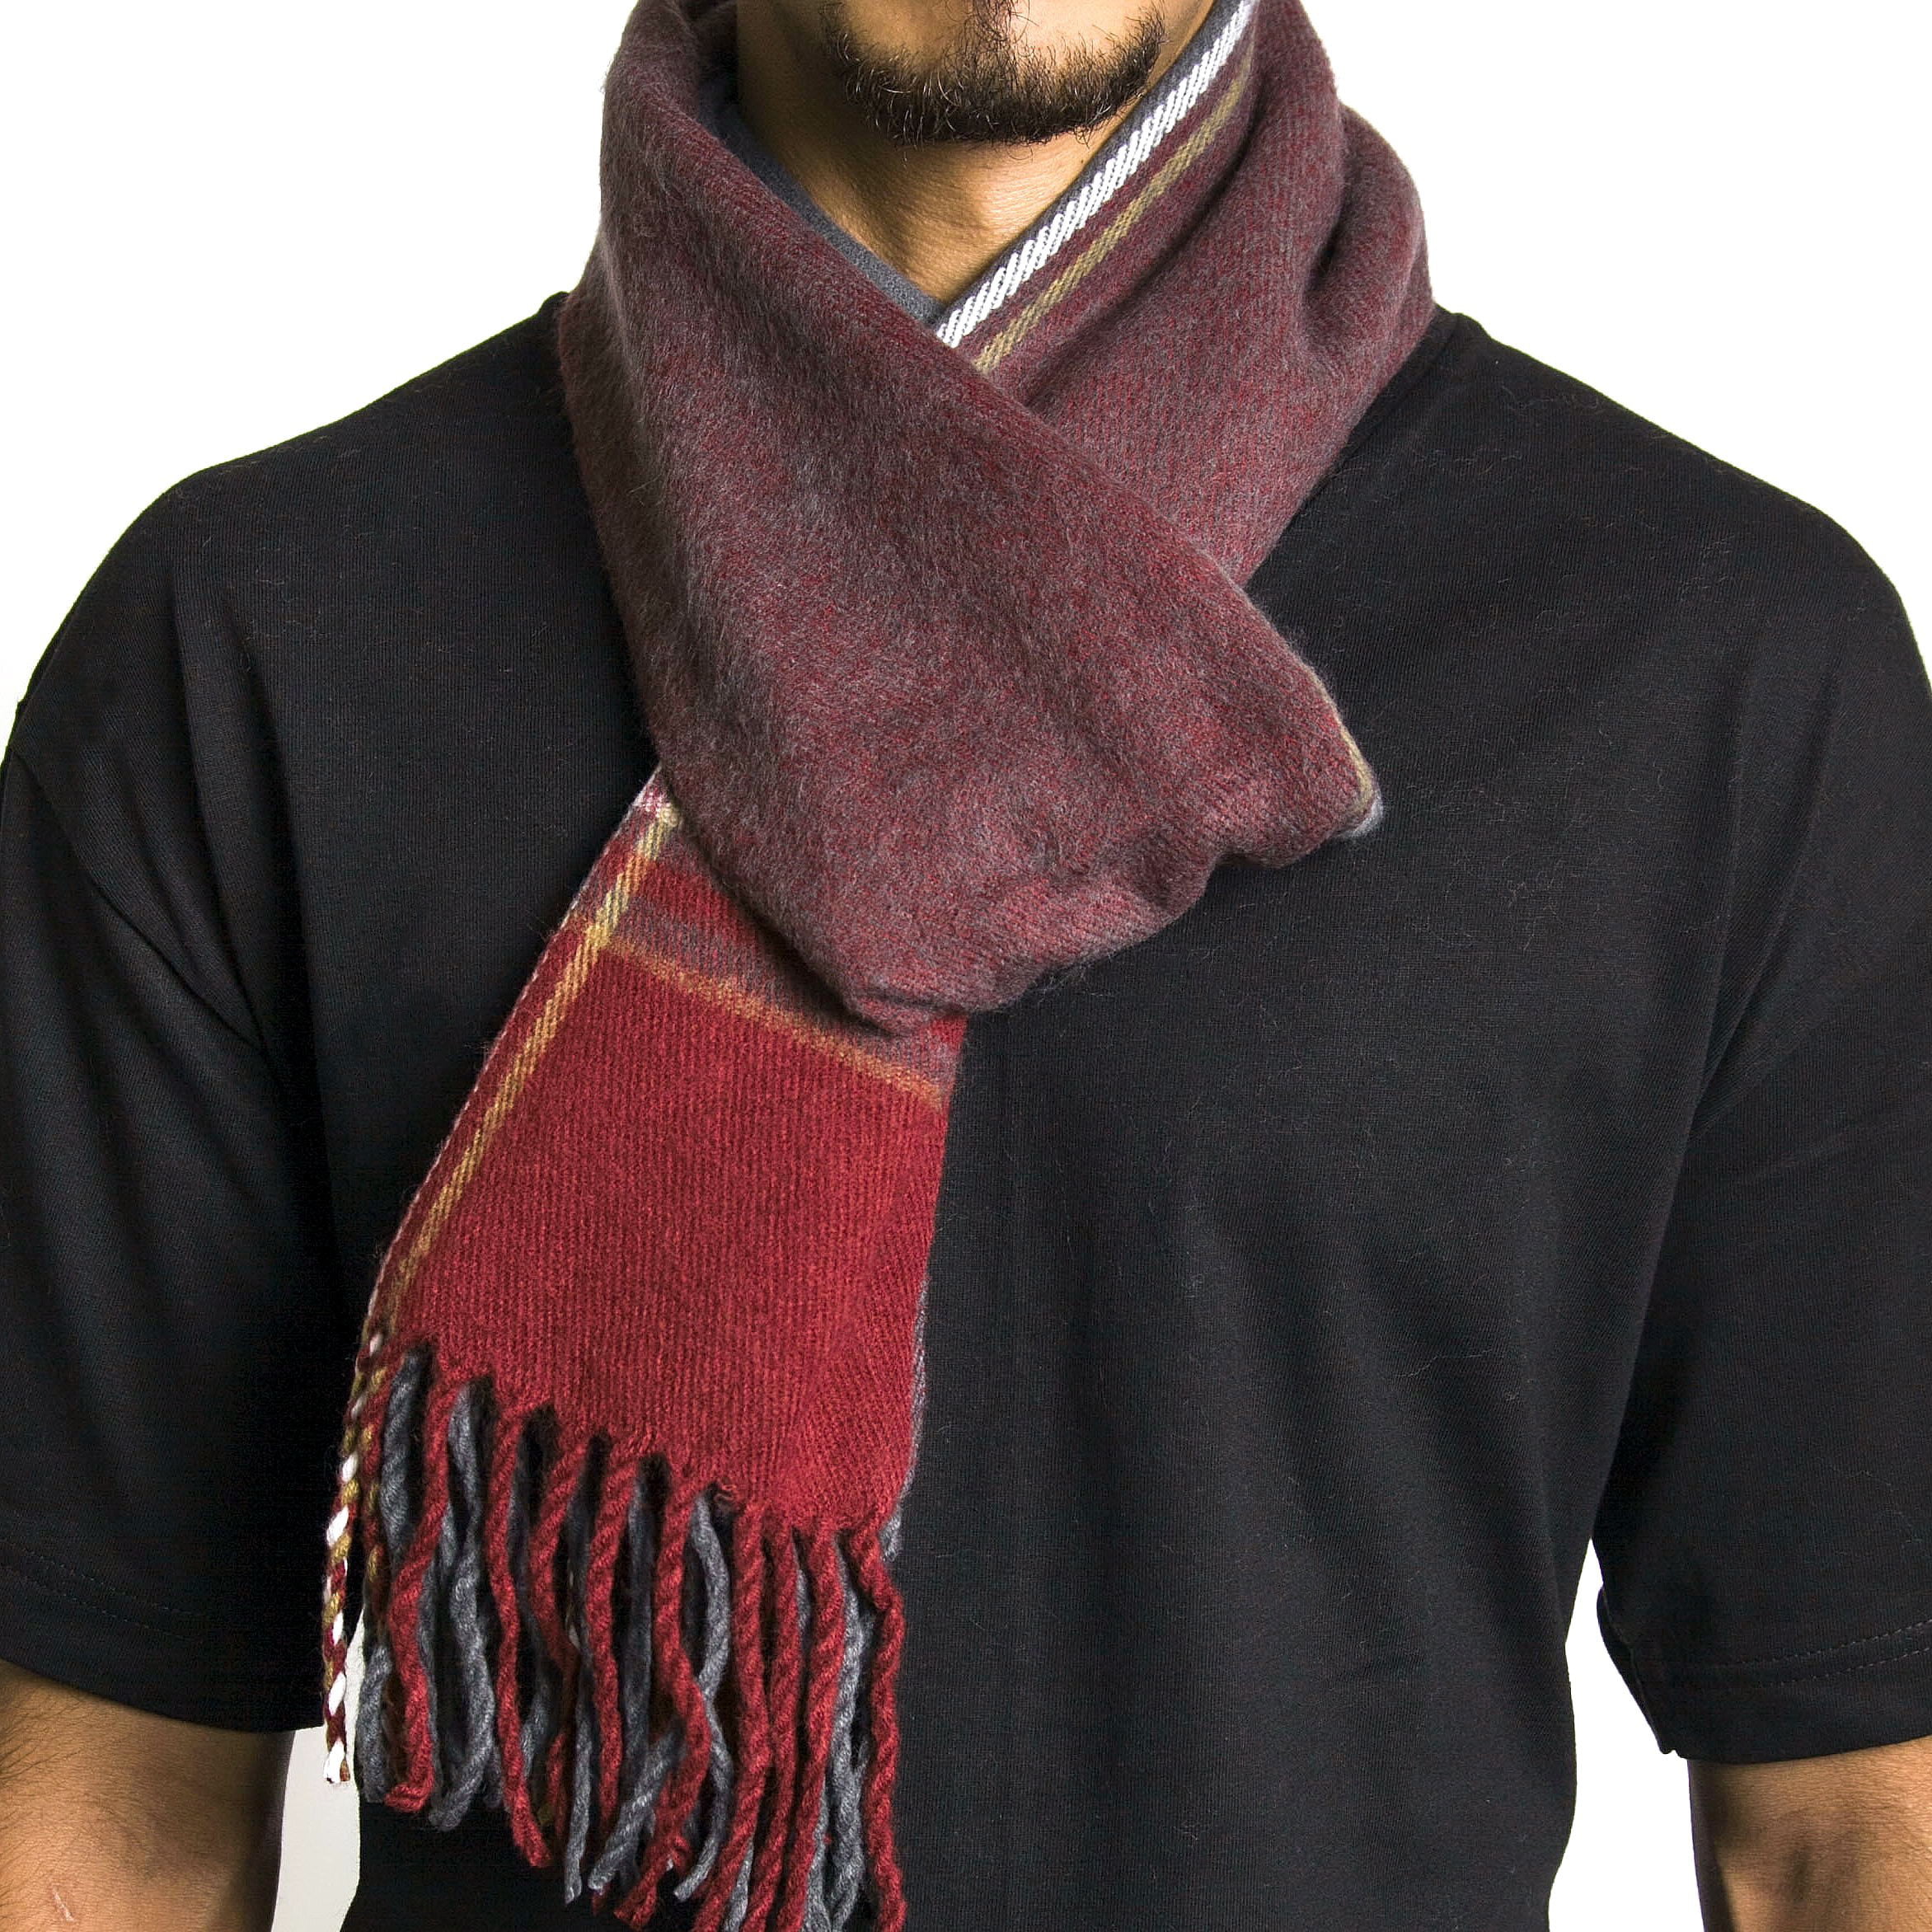 Mens Winter Warm Cashmere Scarf,Fashion Lightweight and Soft Scarves